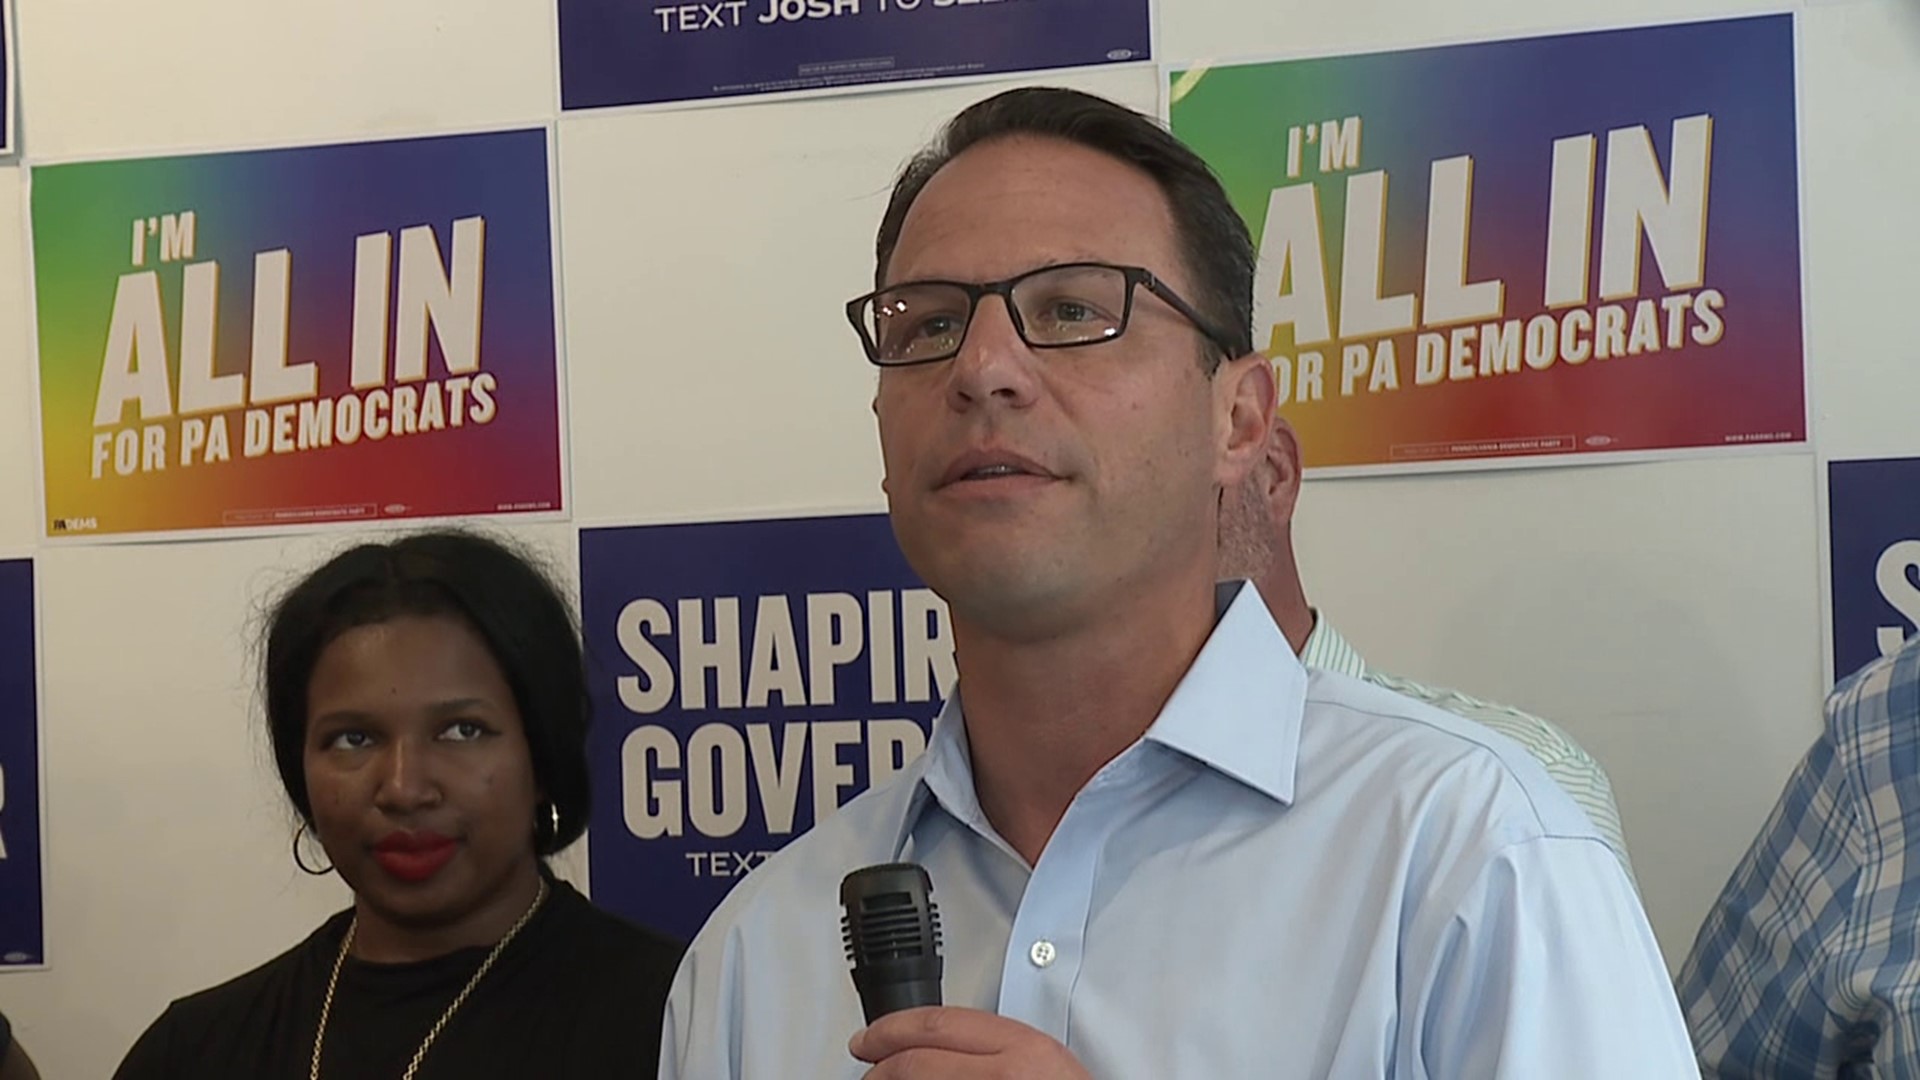 Democratic candidate for governor Josh Shapiro campaigned in Lackawanna, Luzerne, and Lehigh Counties on Saturday.